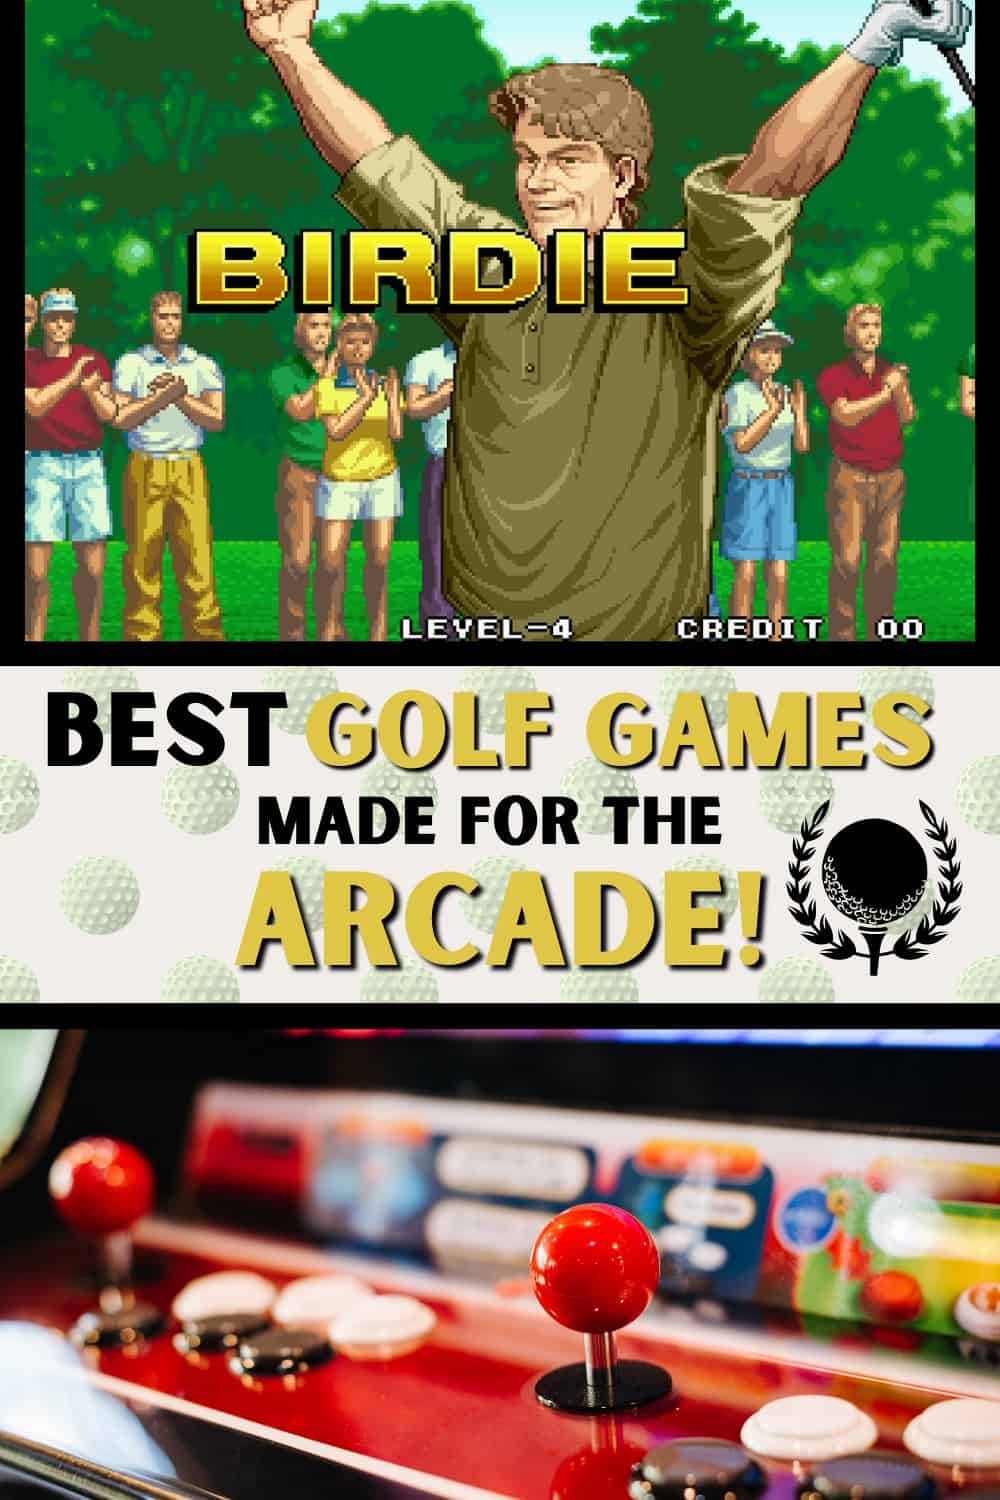 What is the best golf arcade game?